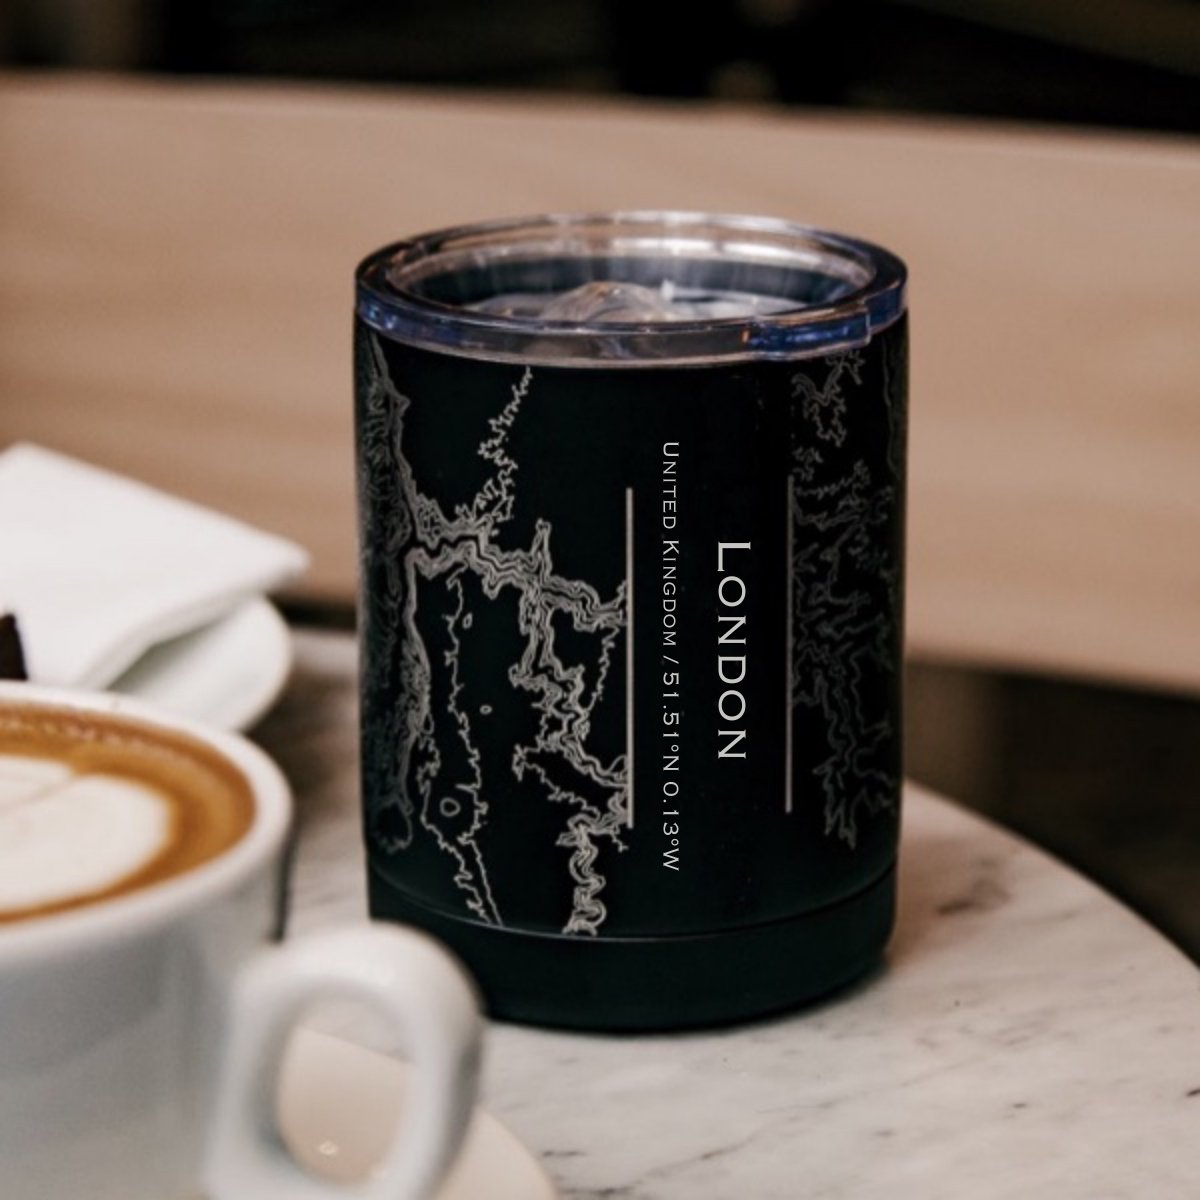 London - United Kingdom Engraved Map Insulated Cup in Matte Black